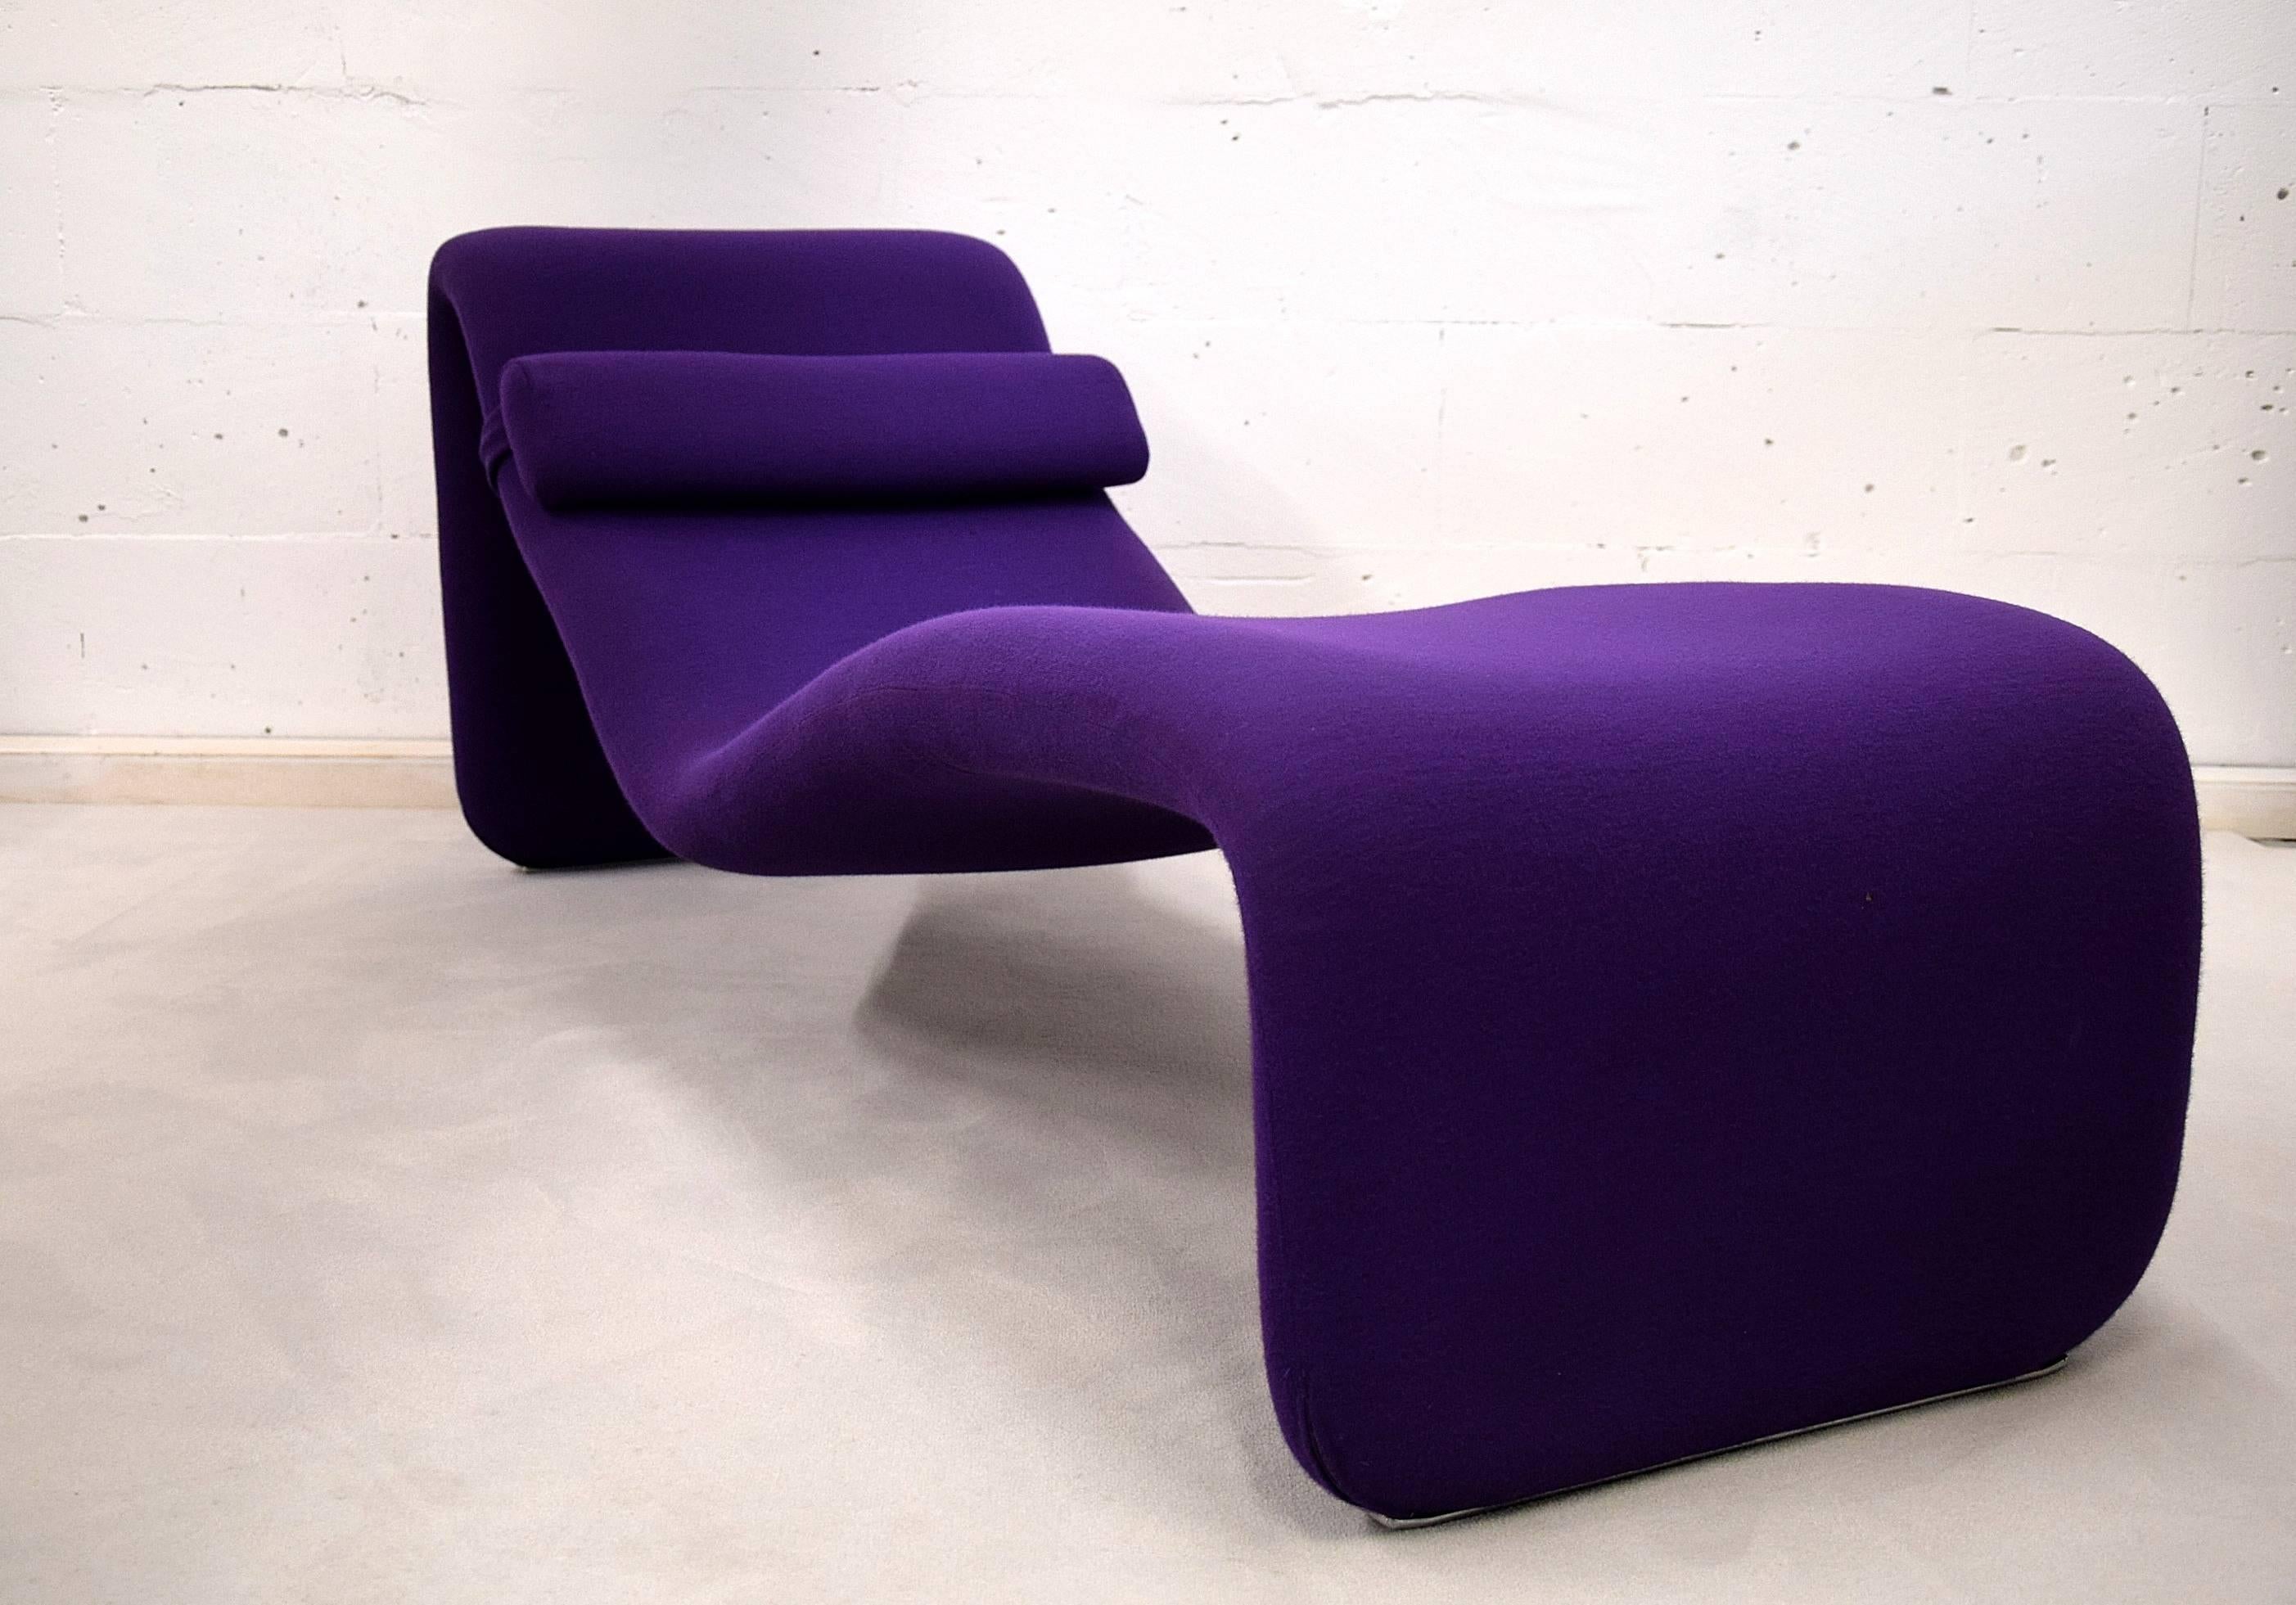 Mid-Century Modern 1965 Djinn Chaise by Olivier Mourque for Airborne International